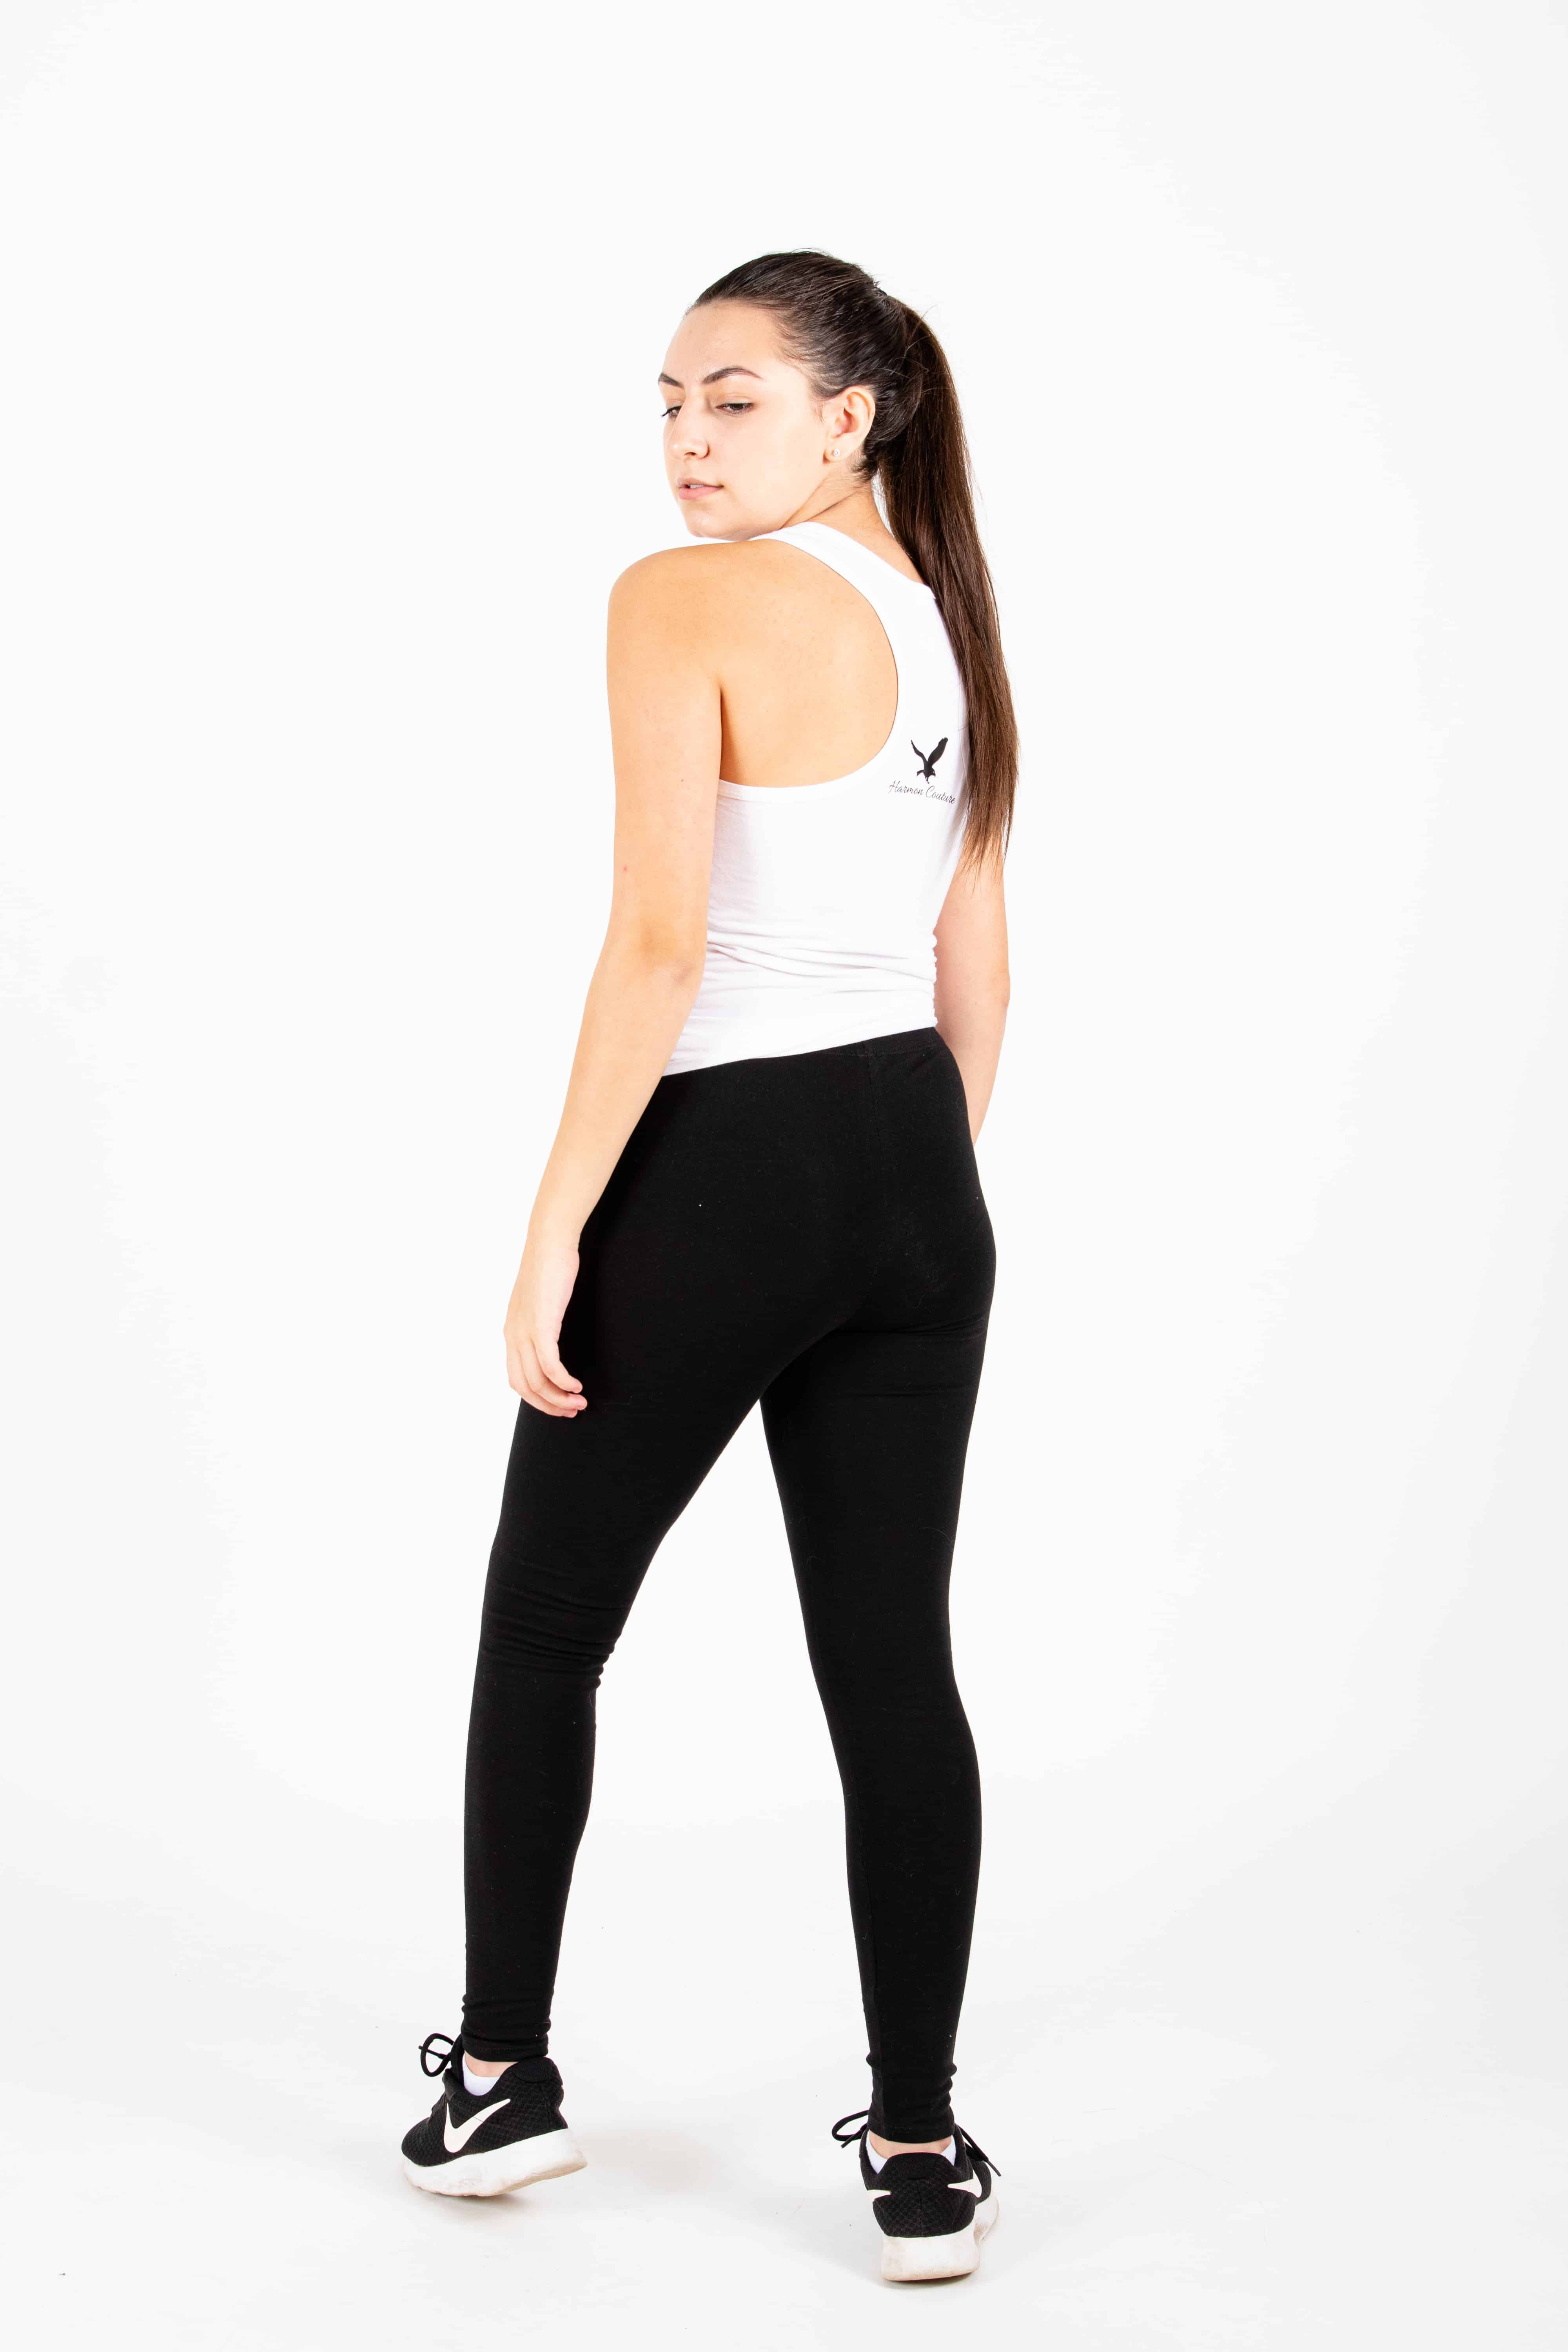 Crafted Apparel CA83280 - Cotton Spandex Jersey Leggings Made in